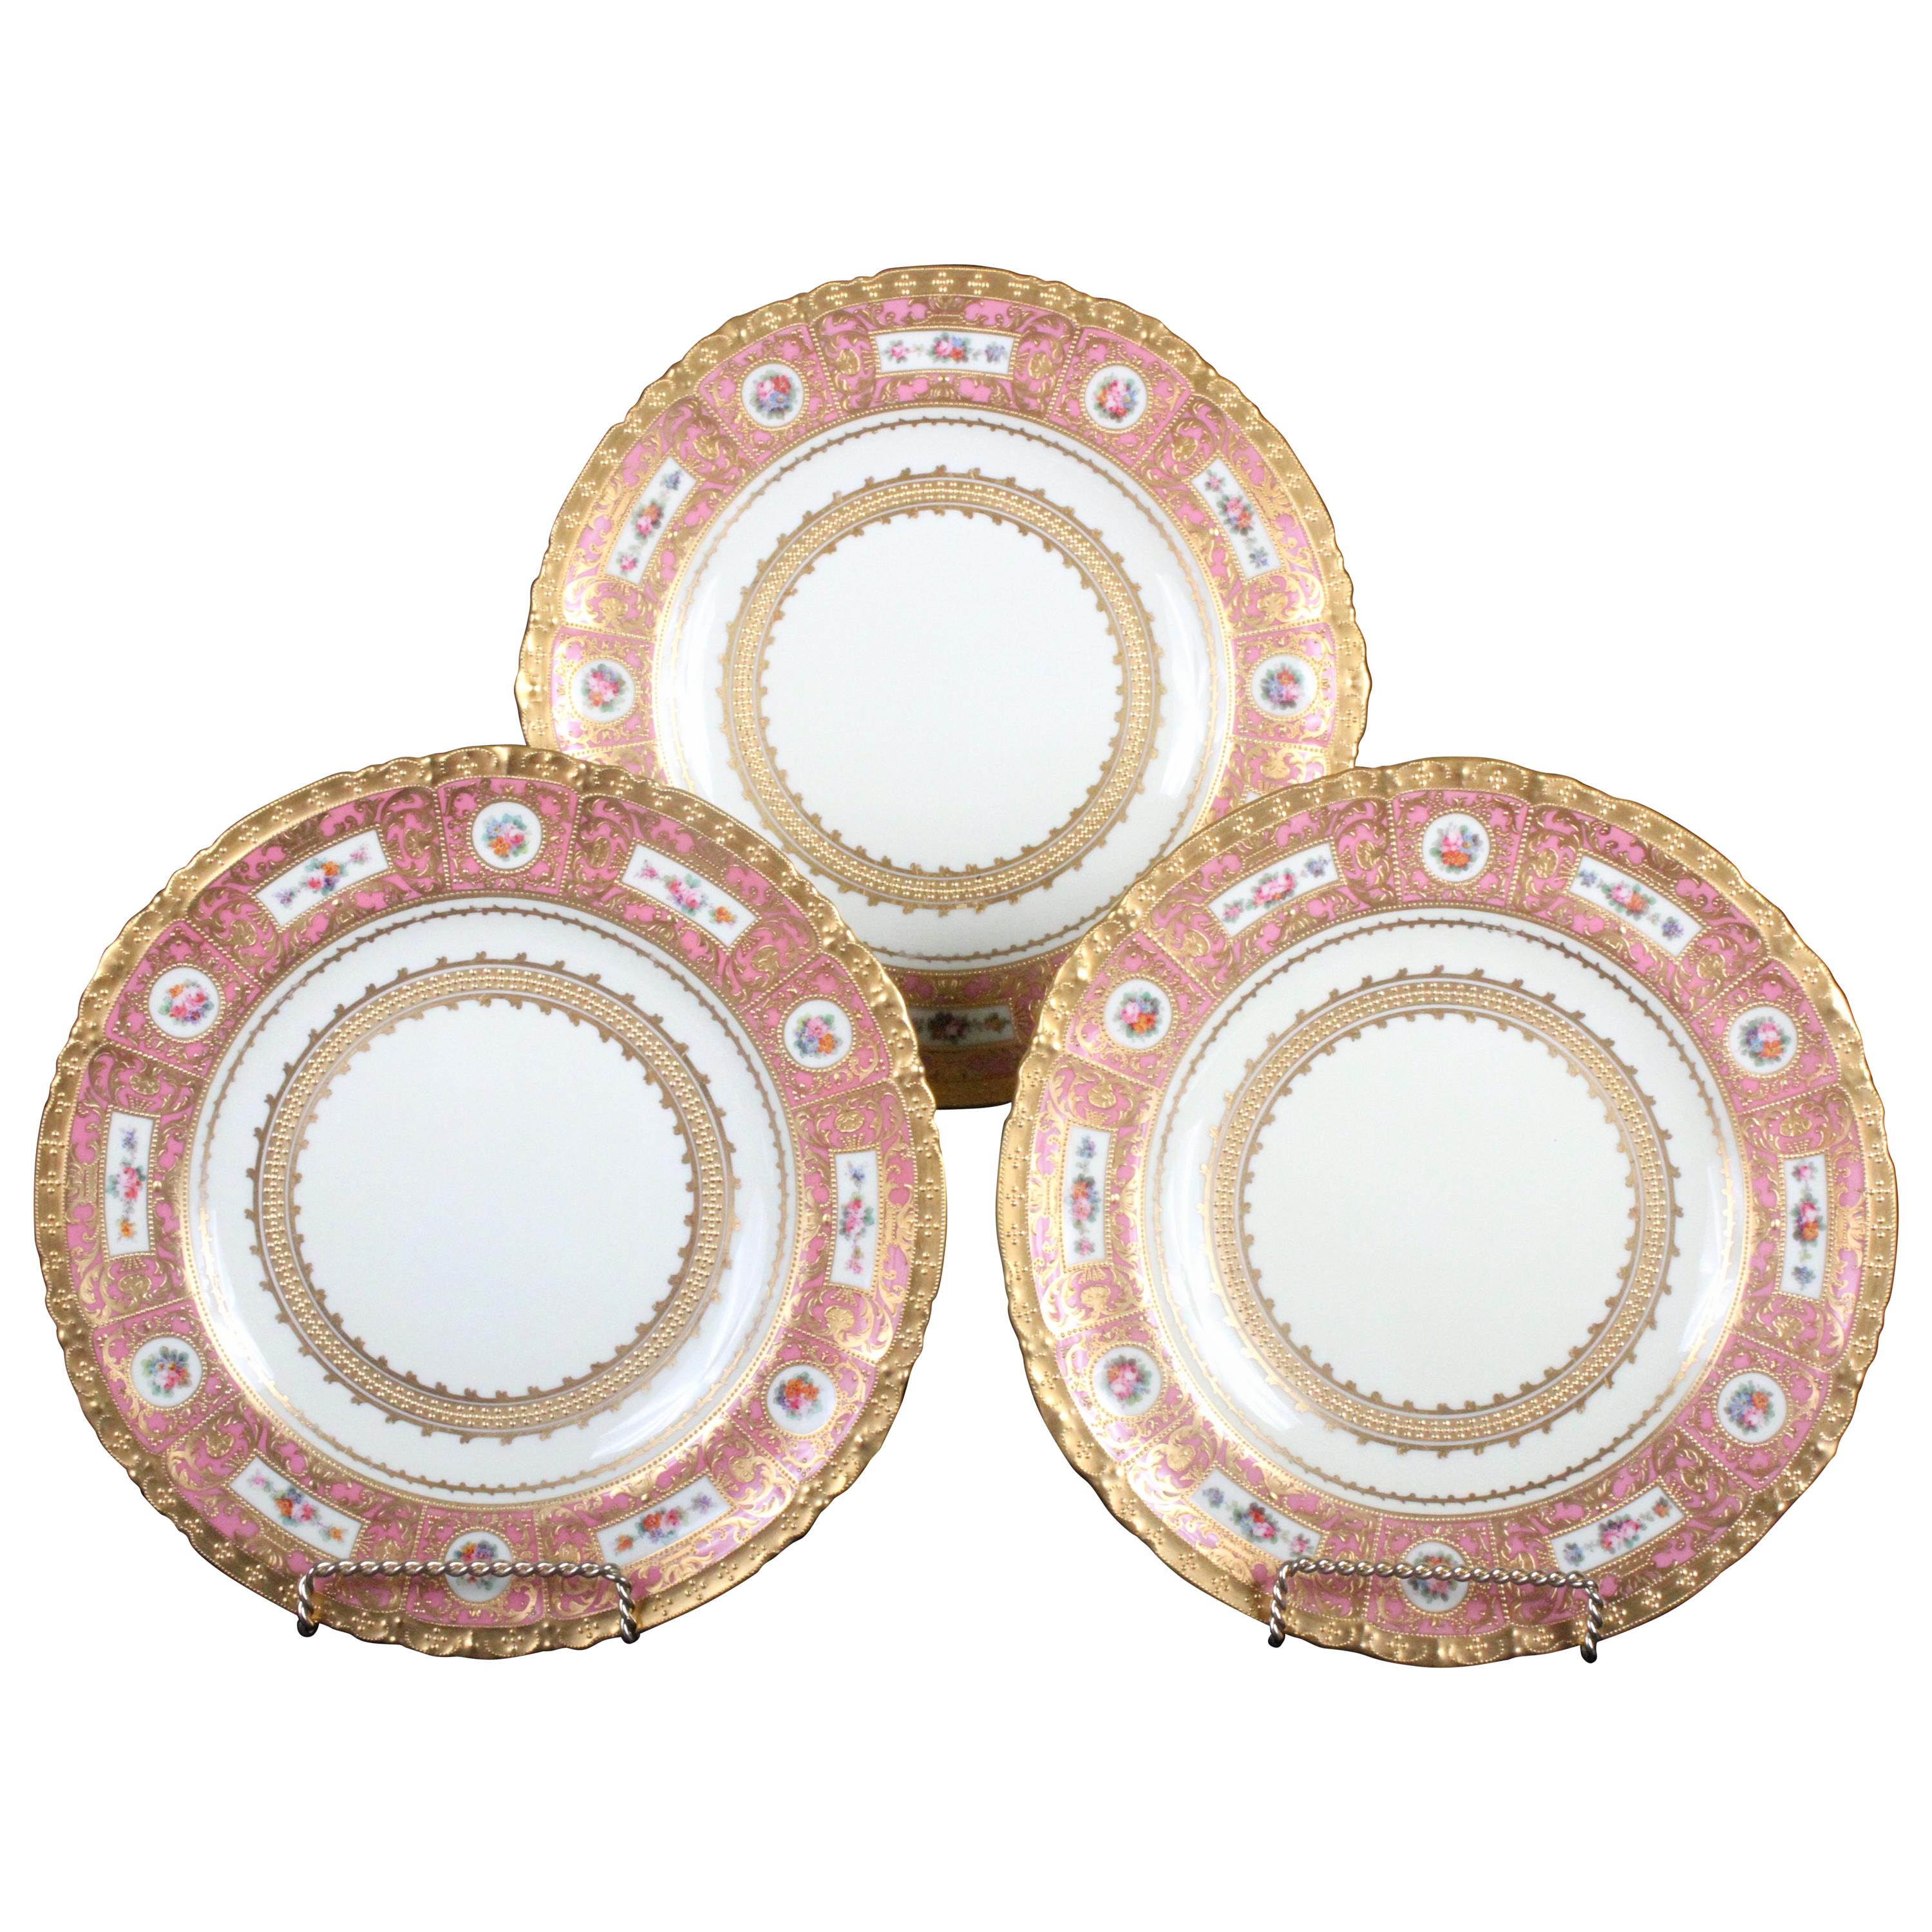 11 Derby for Tiffany Hand Painted and Gilded Pink Service Plates For Sale